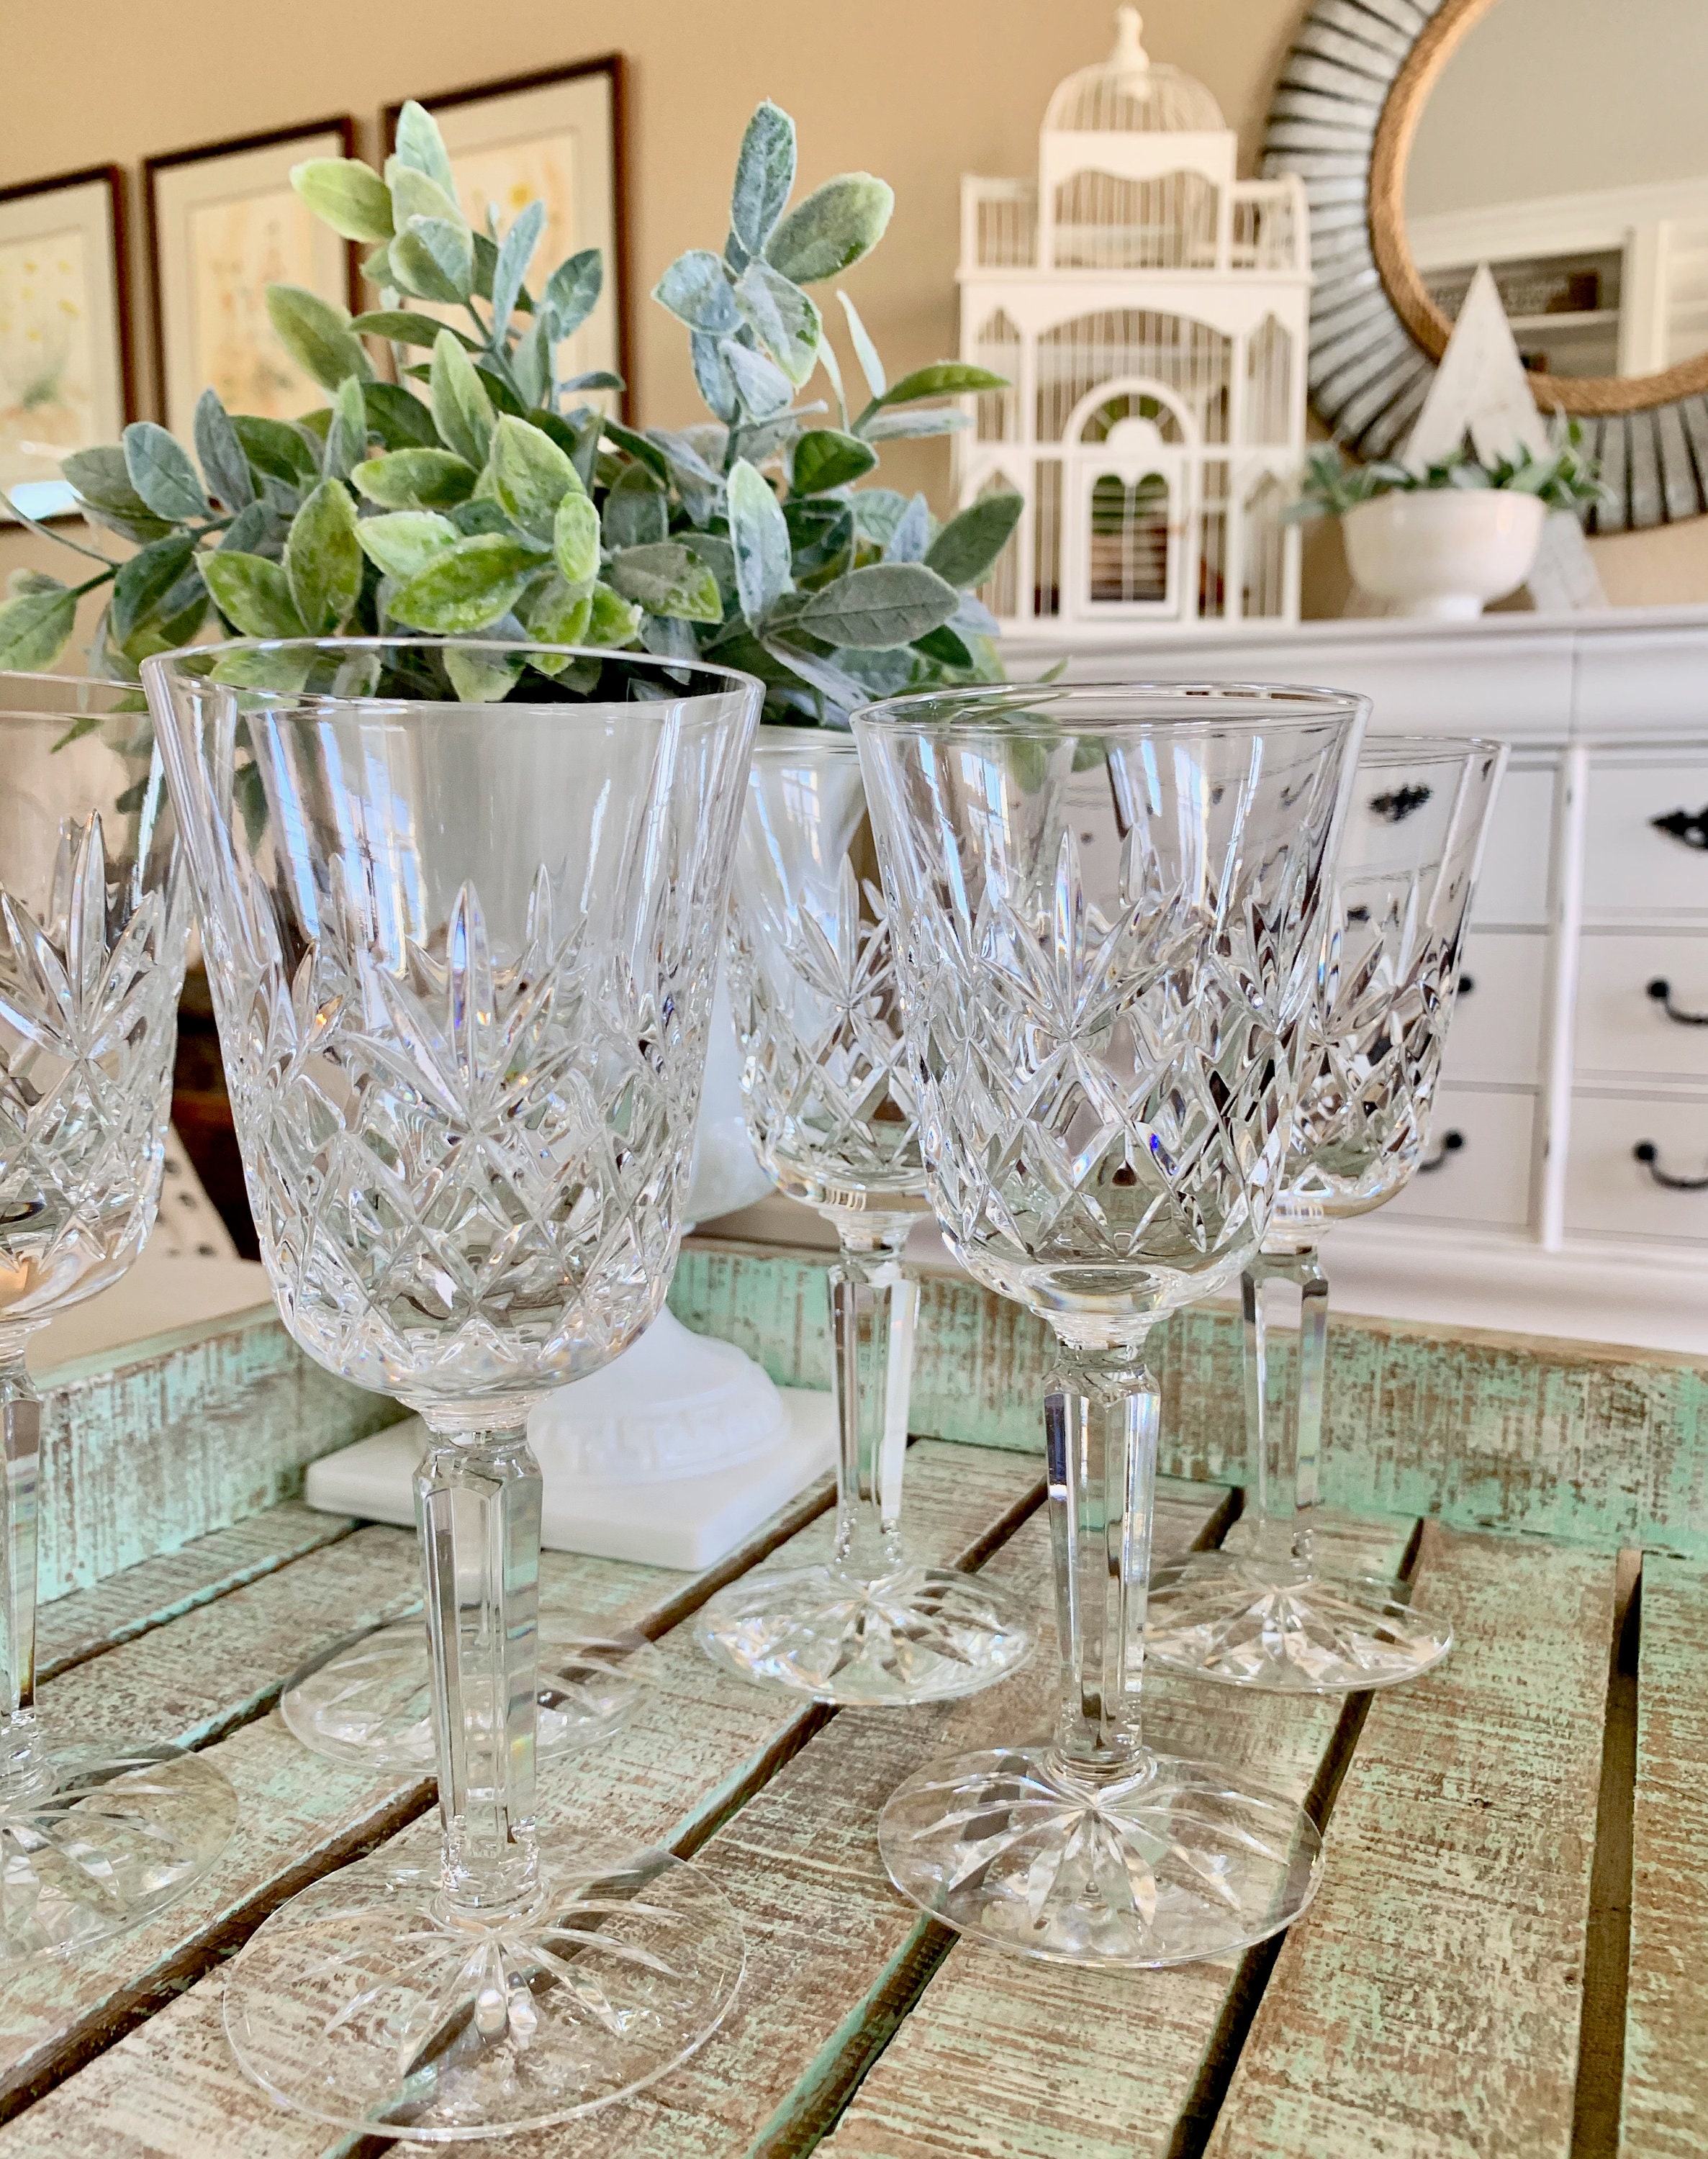 Fifth Avenue Crystal Medallion Wine Glasses Set of 6, 15.5 oz, Long Stem  Durable Glass Cups, Textured Etched Patterns